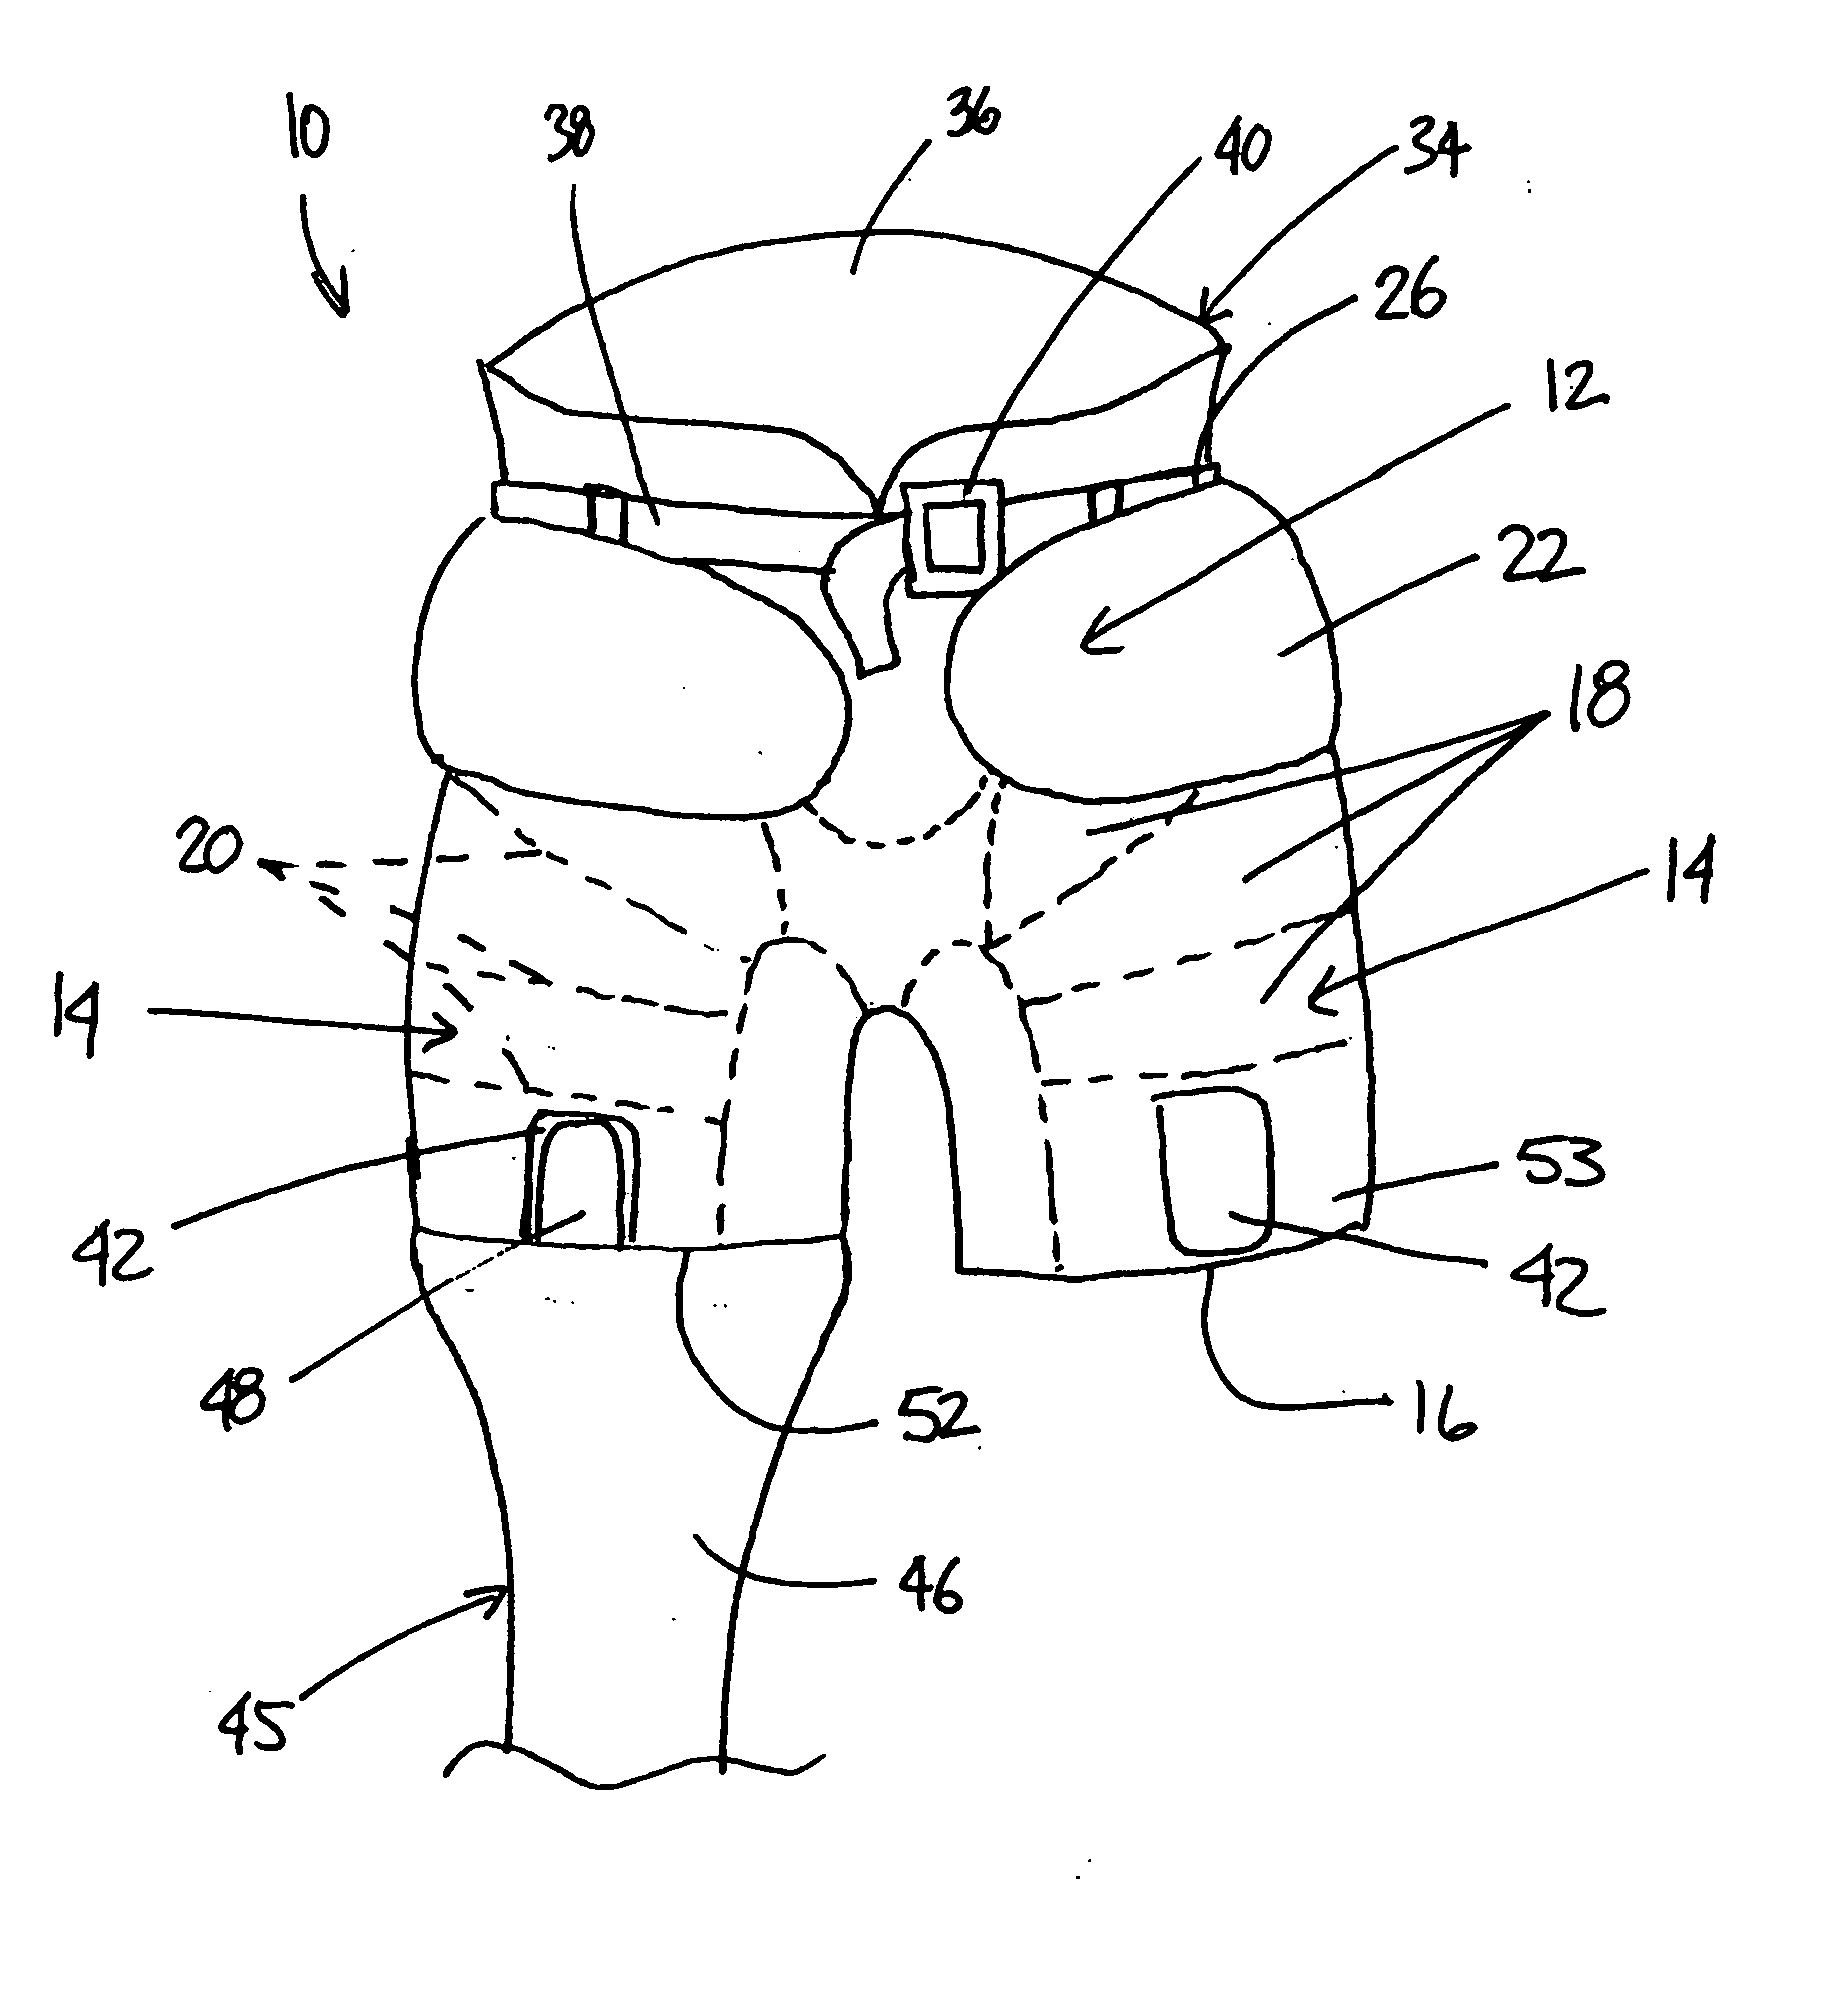 Sports pant with outer shell and sock attachment system